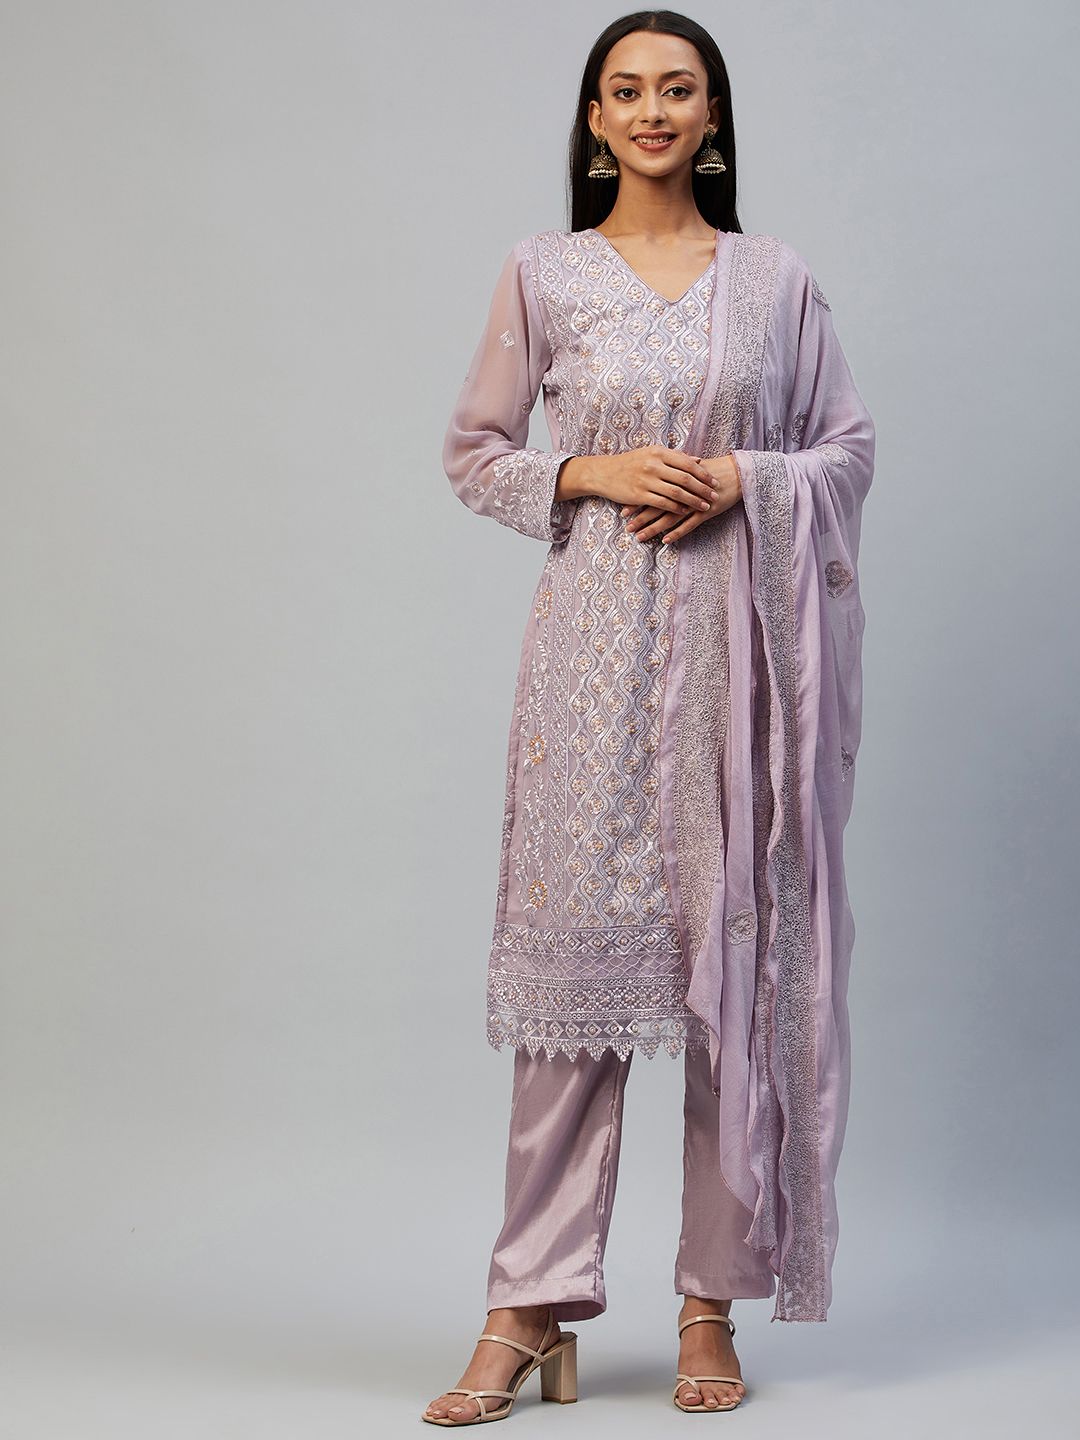 Readiprint Fashions Violet & Mauve Embroidered Unstitched Dress Material Price in India